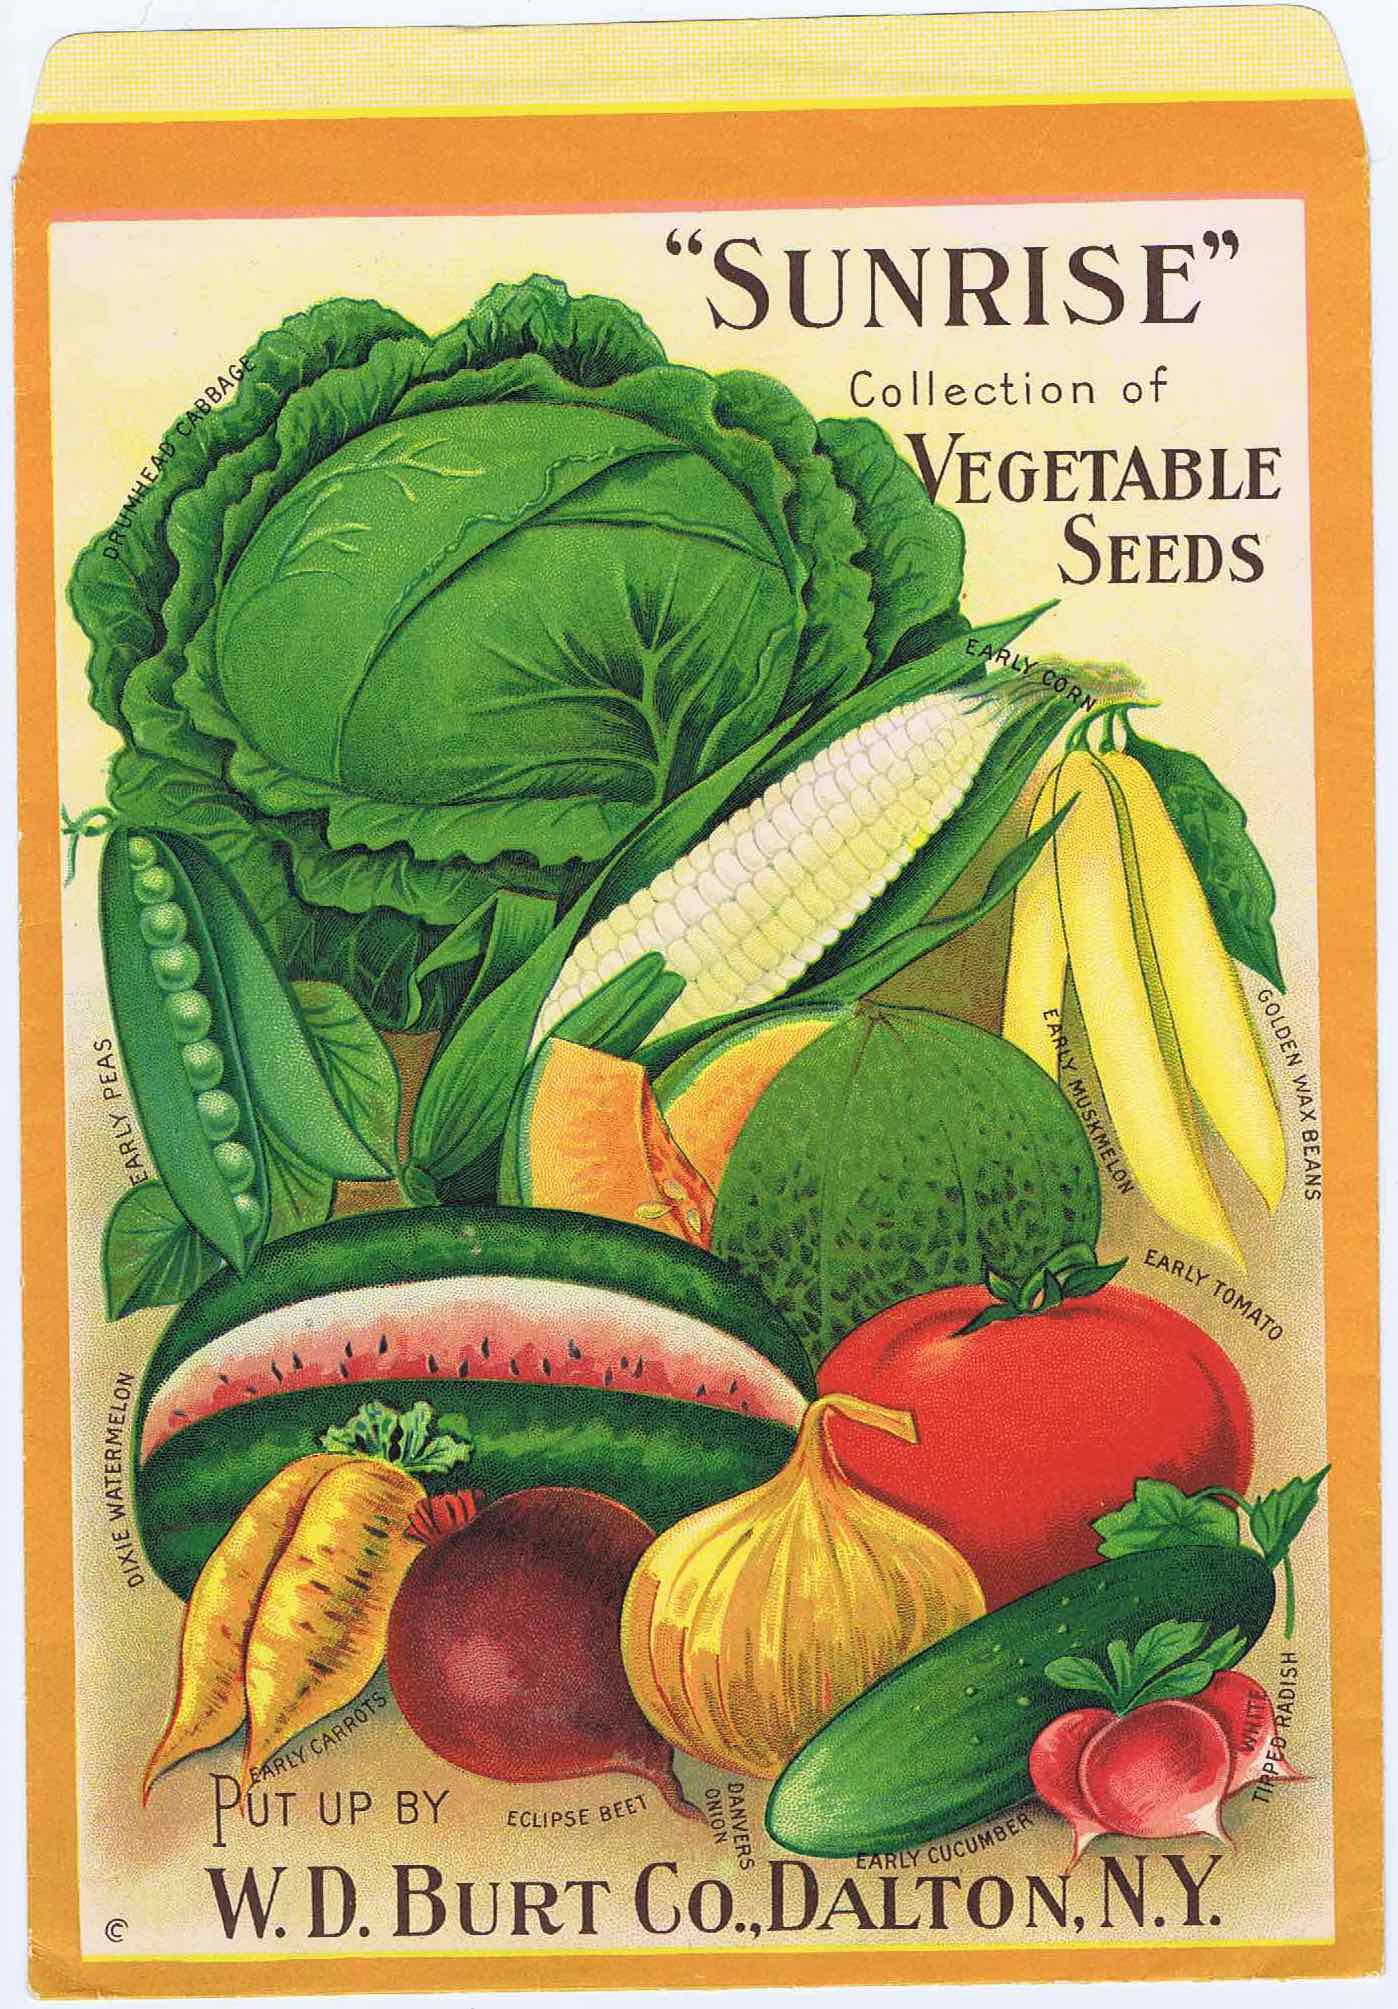 J338	“SUNRISE” COLLECTION OF VEGETABLE SEEDS